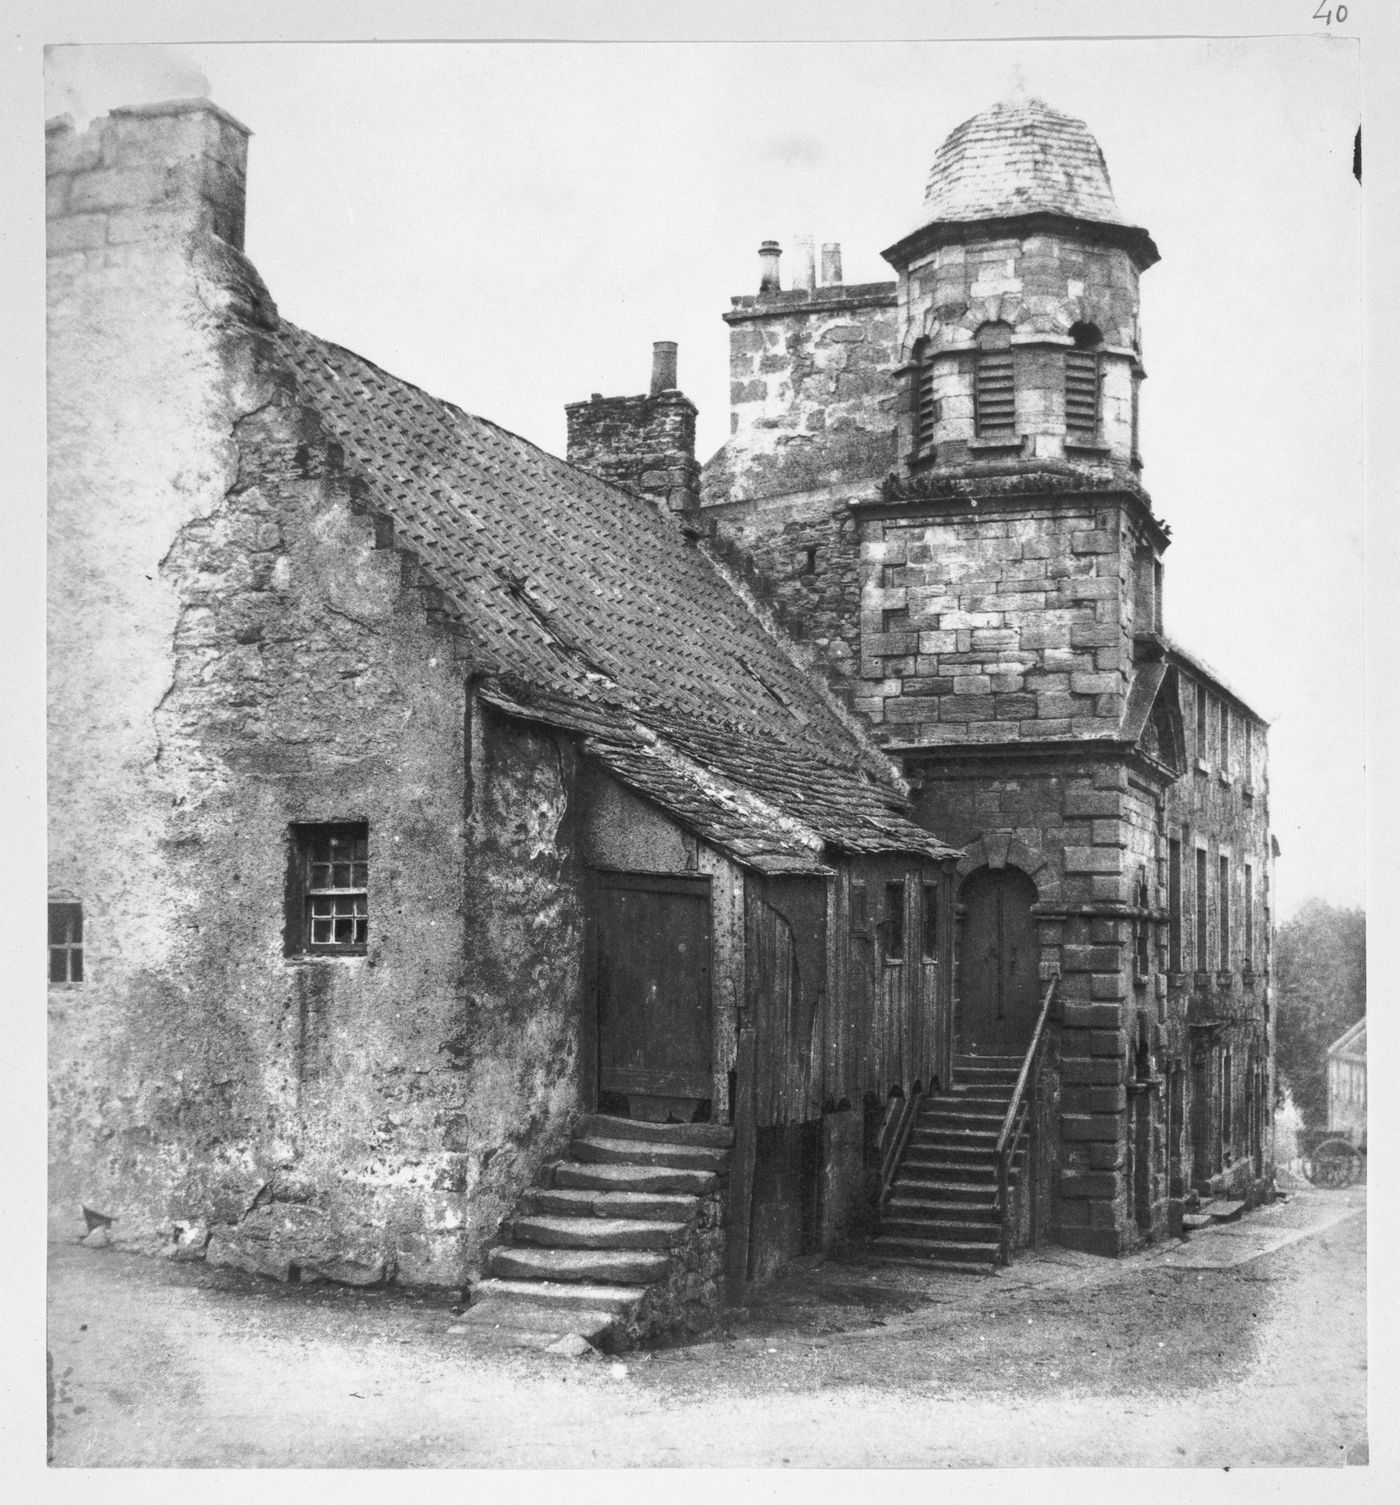 Tolbooth, Inverkeithing